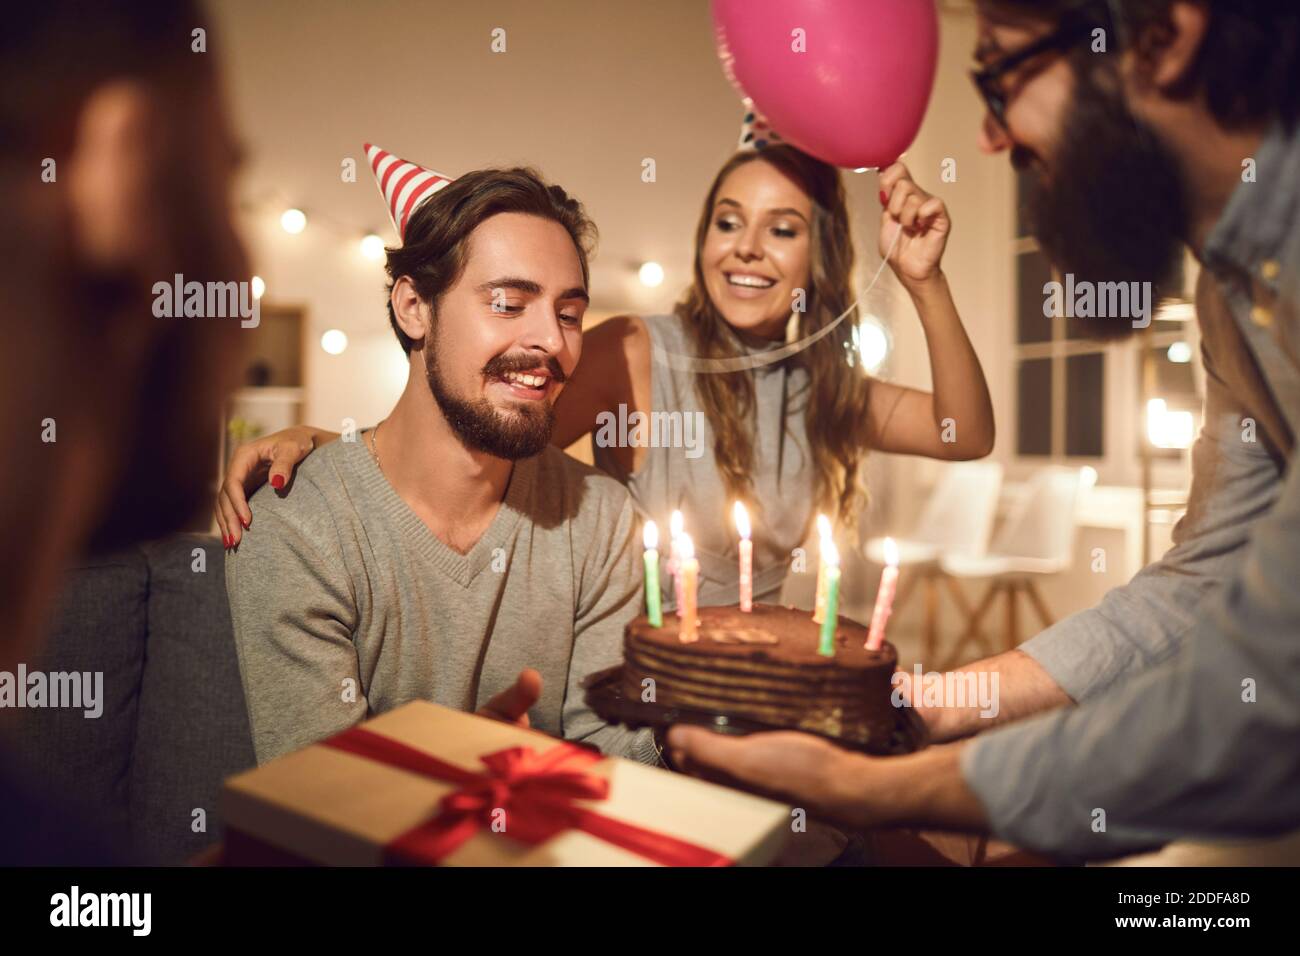 Man receives greetings and a delicious chocolate cake with burning candles given to him by friends. Stock Photo